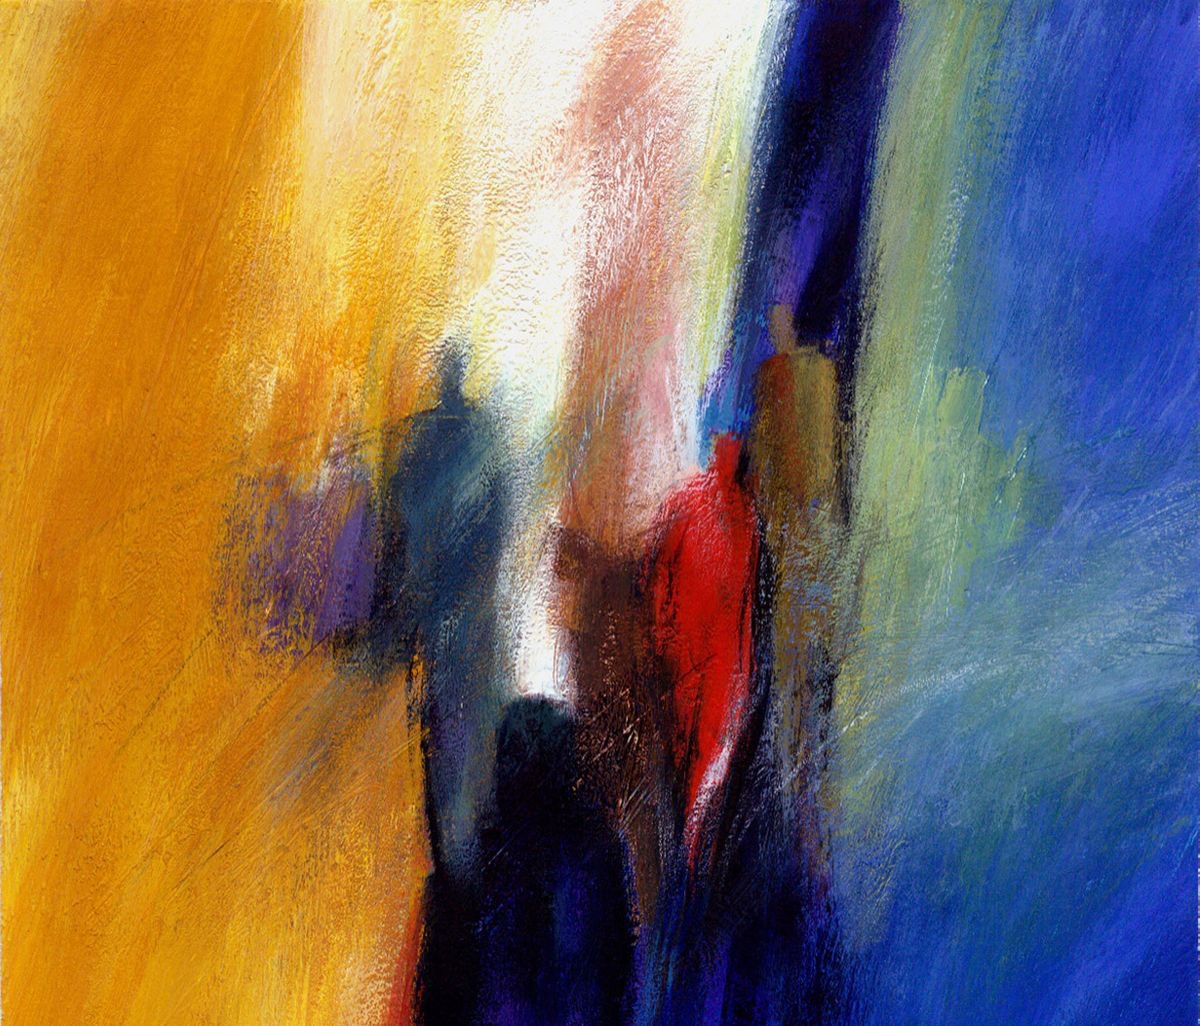 Get together,Original acrylic painting on canvas.( 60)x(50)c.m.Ready to hang by Mahtab Alizadeh